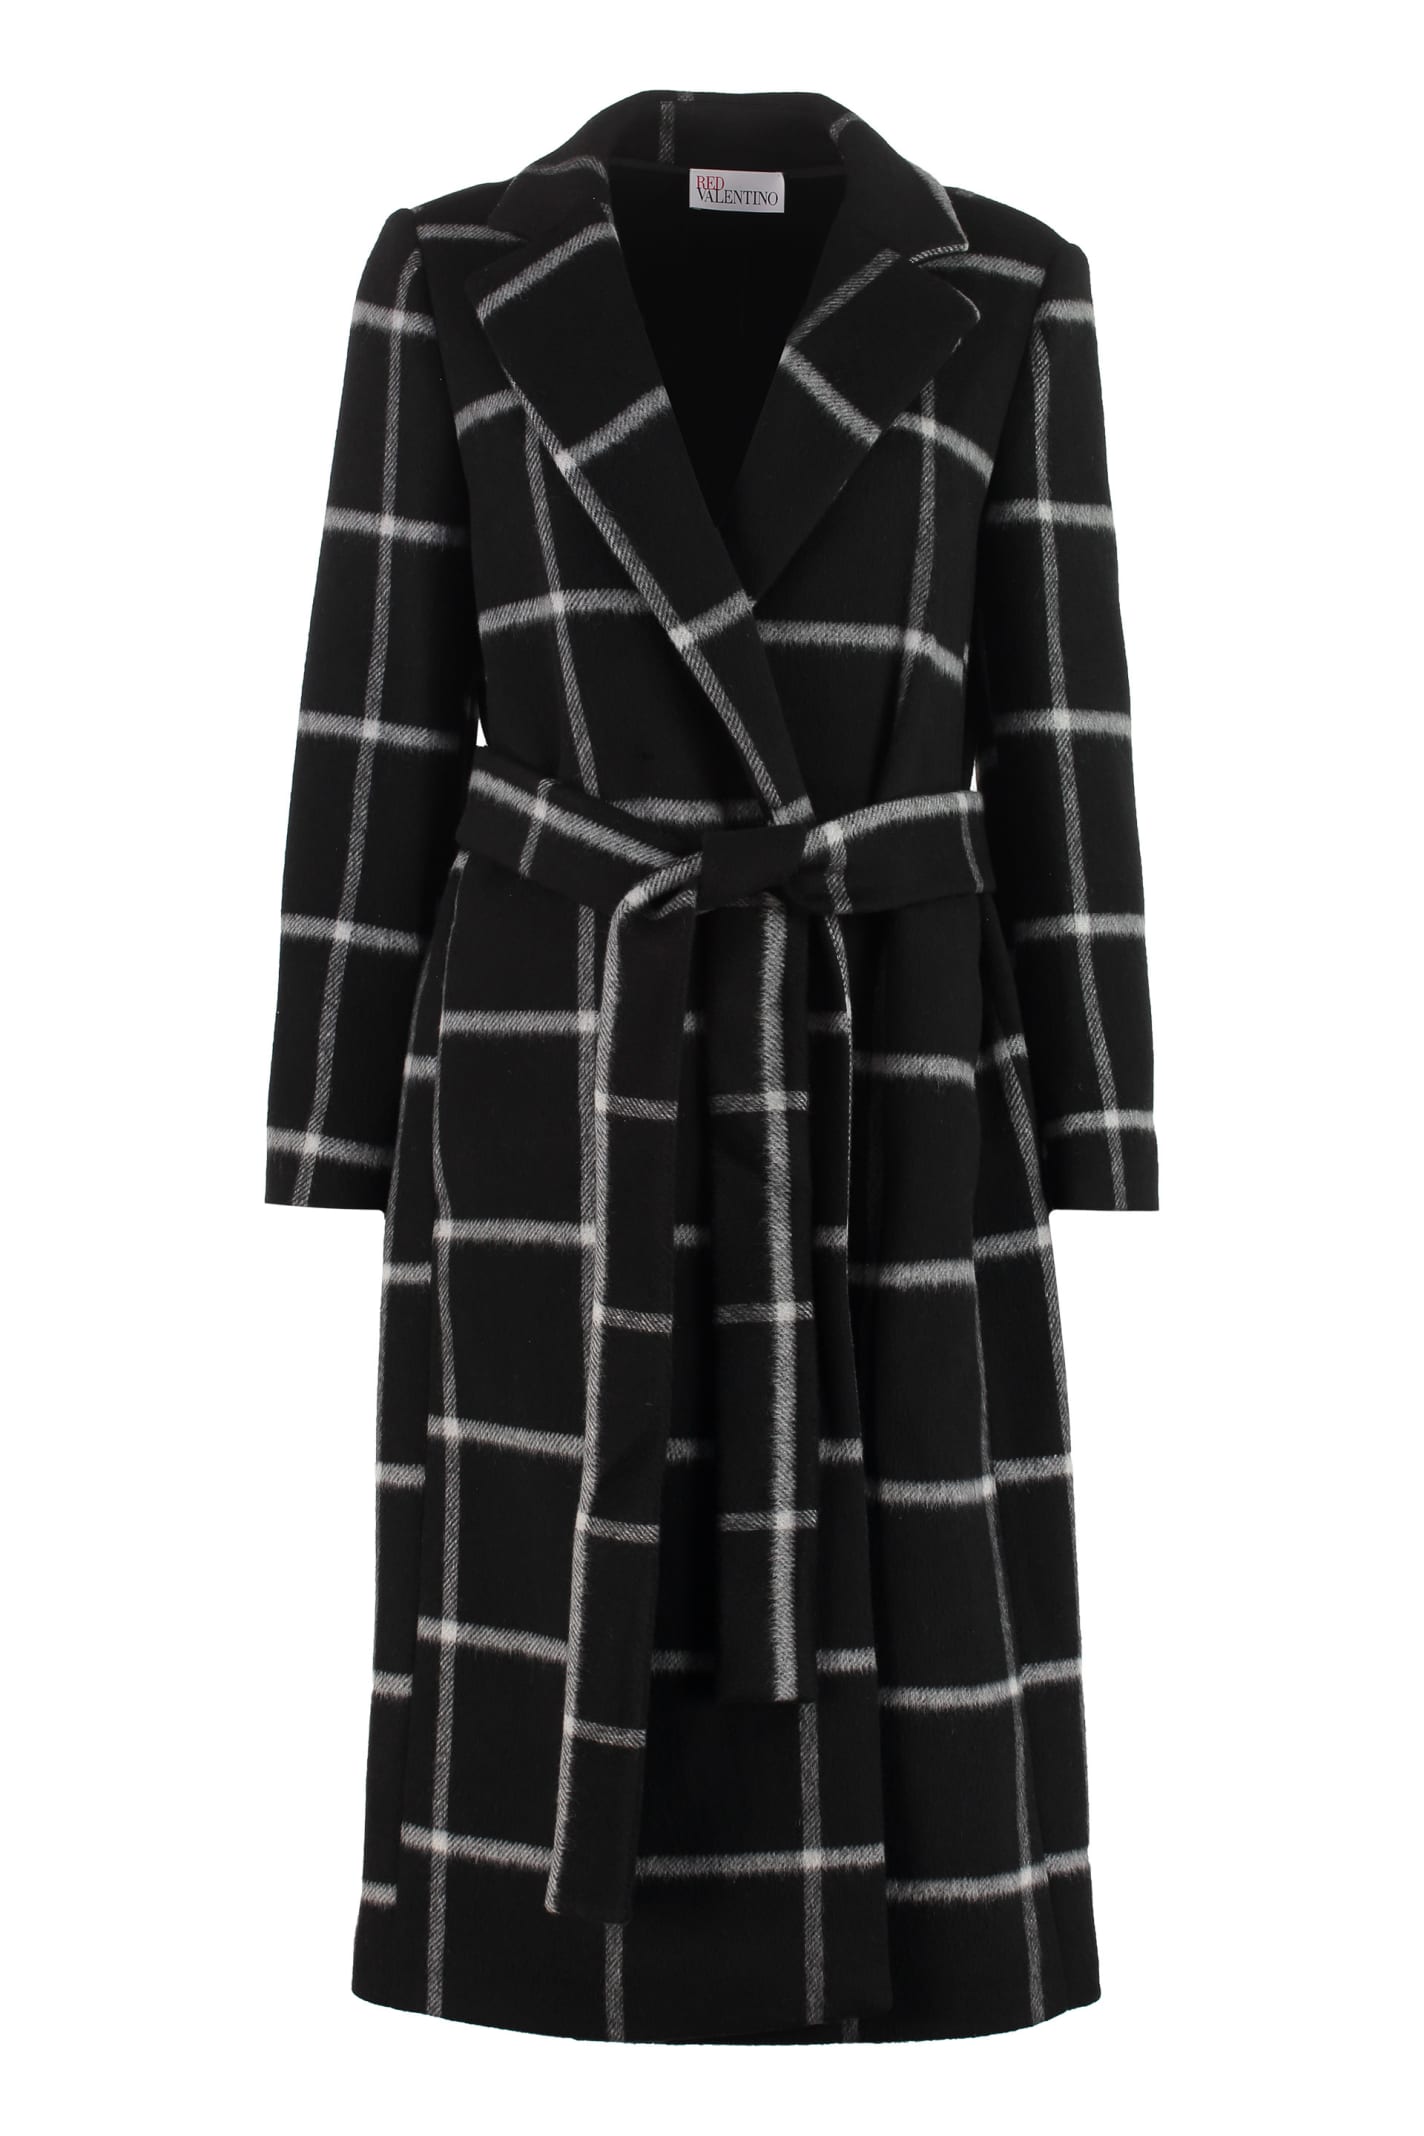 RED Valentino Wool Blend Coat